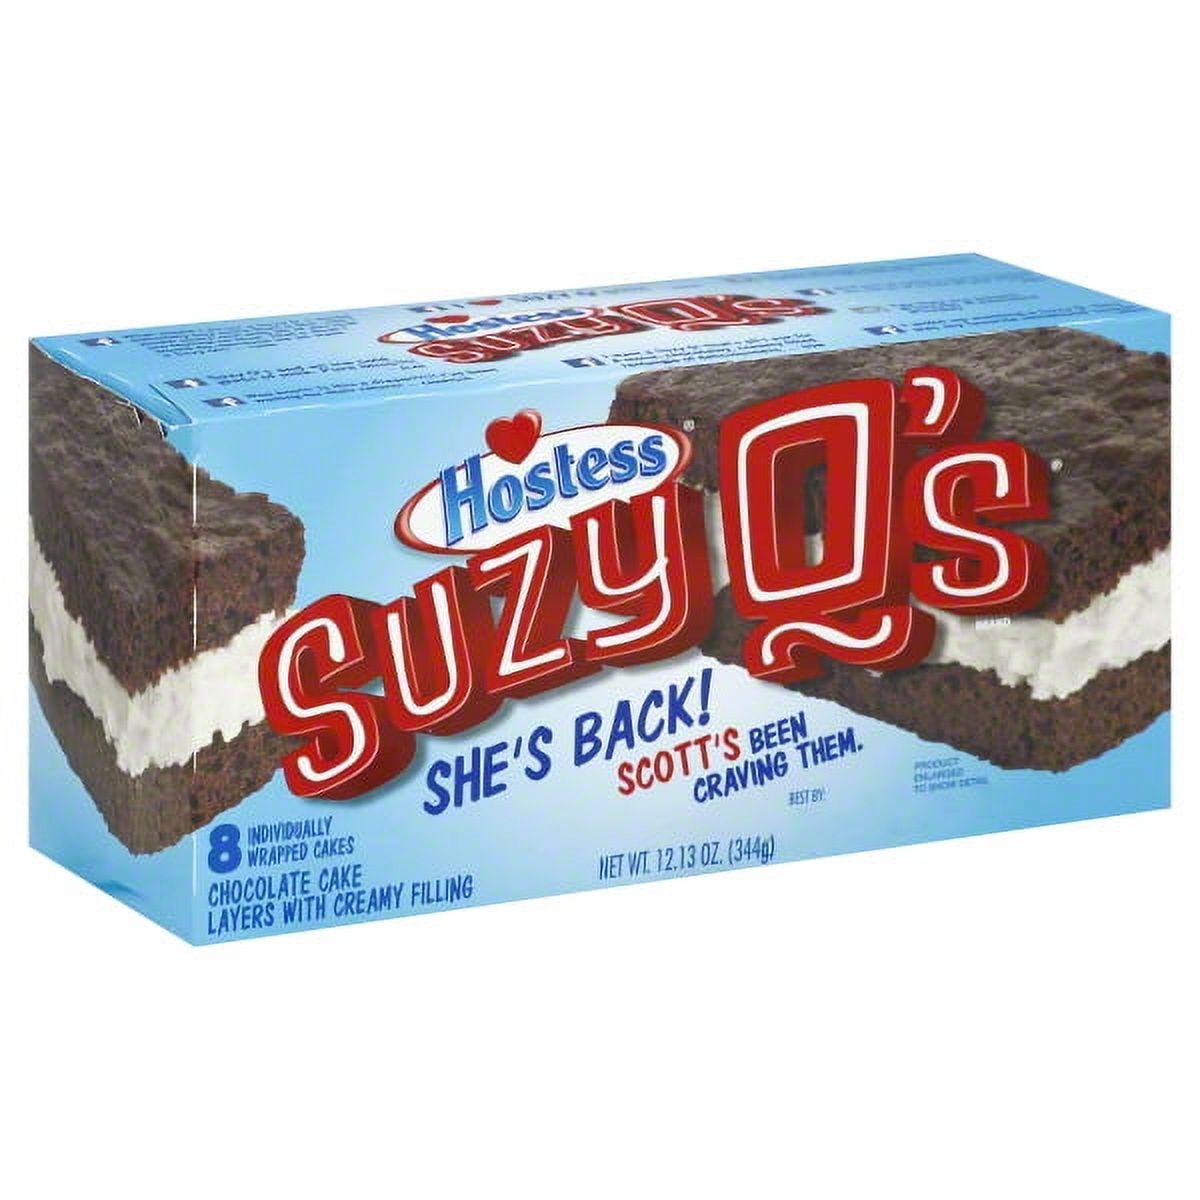 Hostess Suzy Q's Snack Cakes, 8 count, 12.13 oz - image 1 of 3